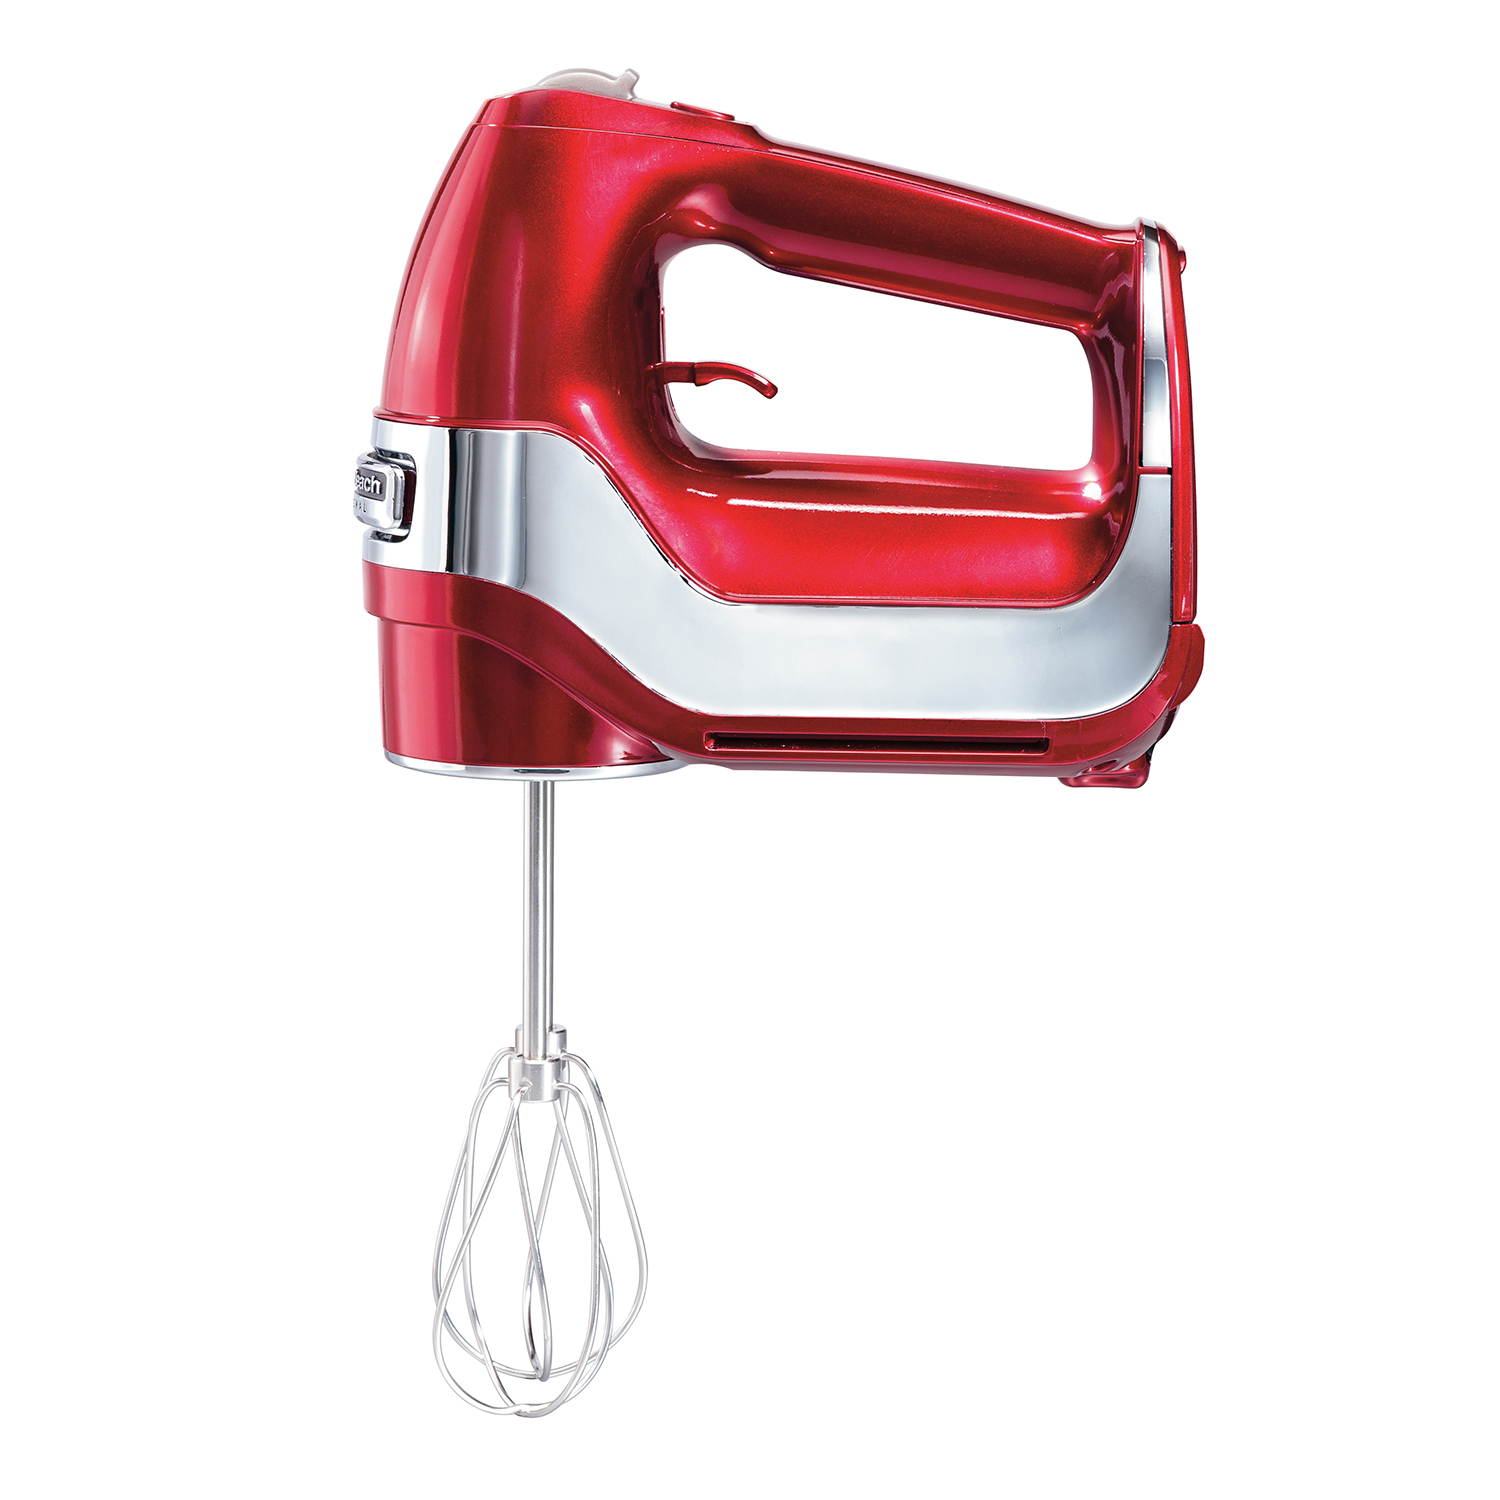 and Snap-On Storage Case One Size Red and Chrome Dough Hooks with Stainless Steel Twisted Wire Beaters Whisk Hamilton Beach 62653 5-Speed Electric Hand Mixer 